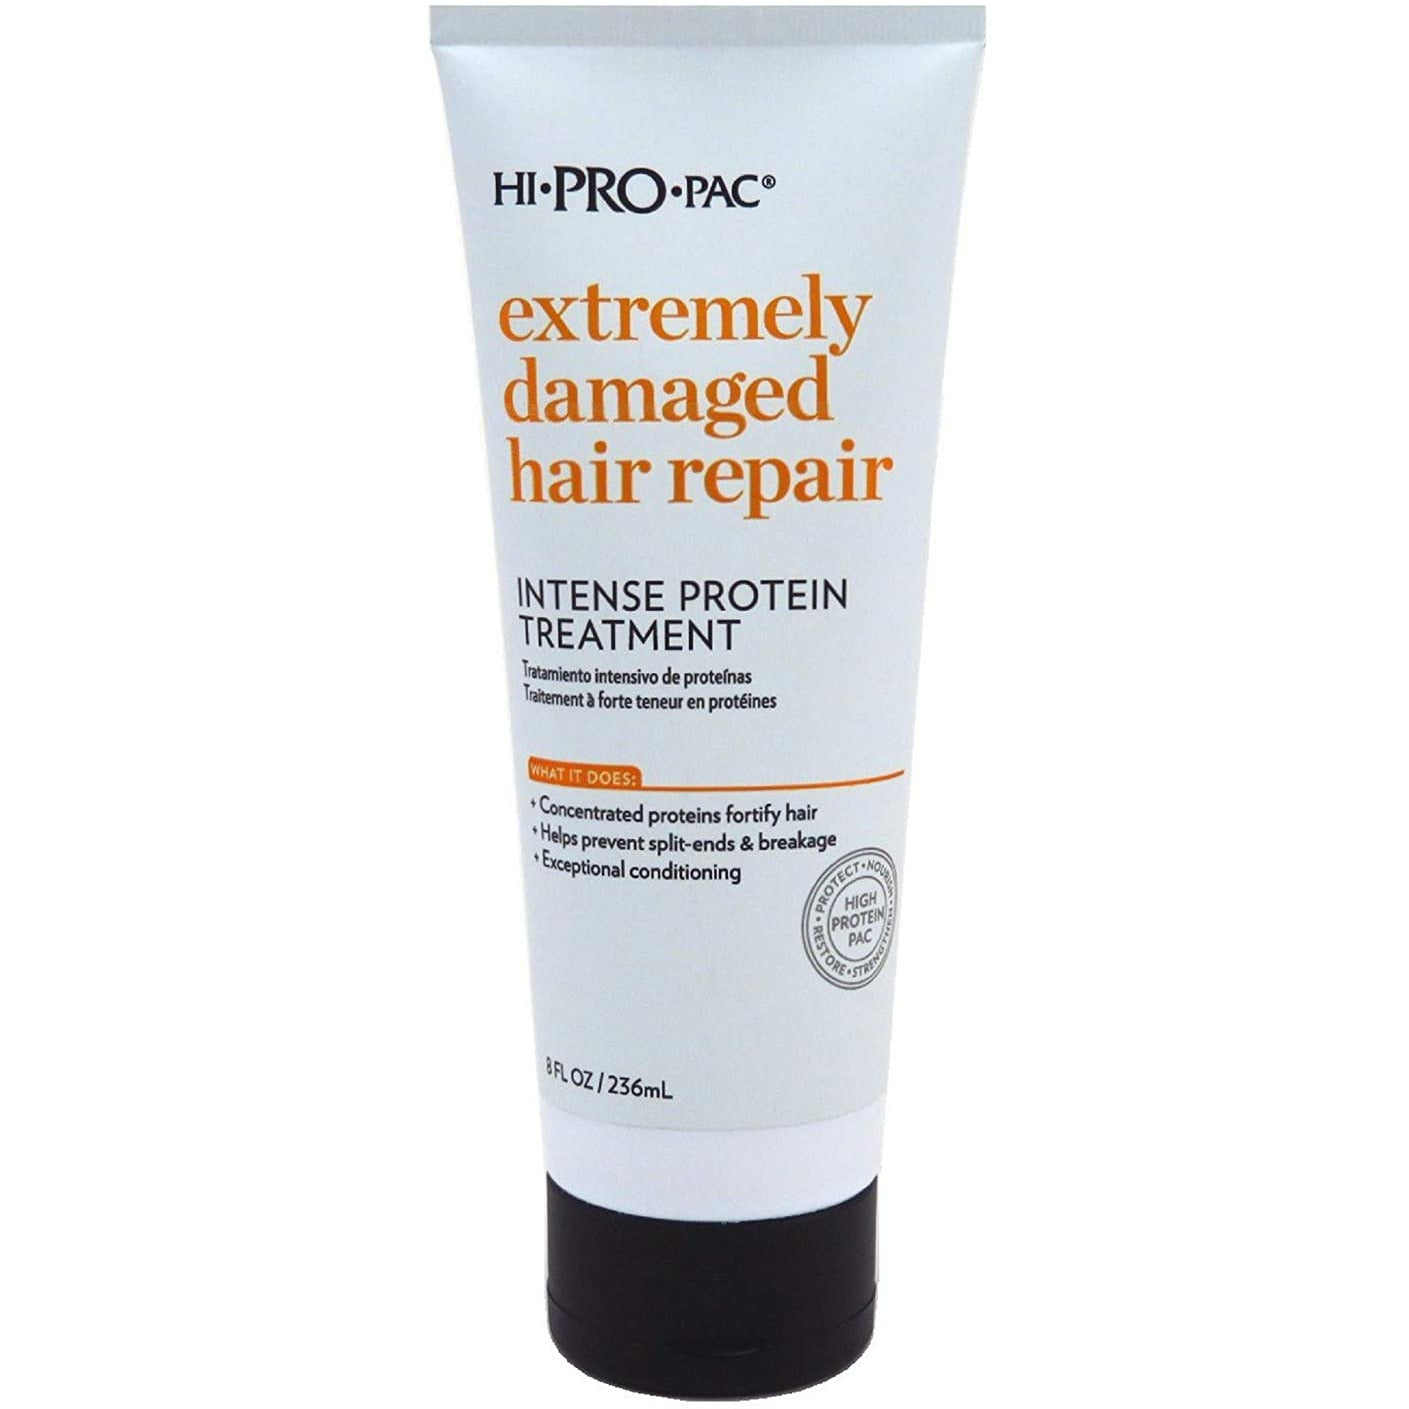 Hi-Pro-Pac Extremely Damaged Hair Repair Intense Protein Hair Treatment